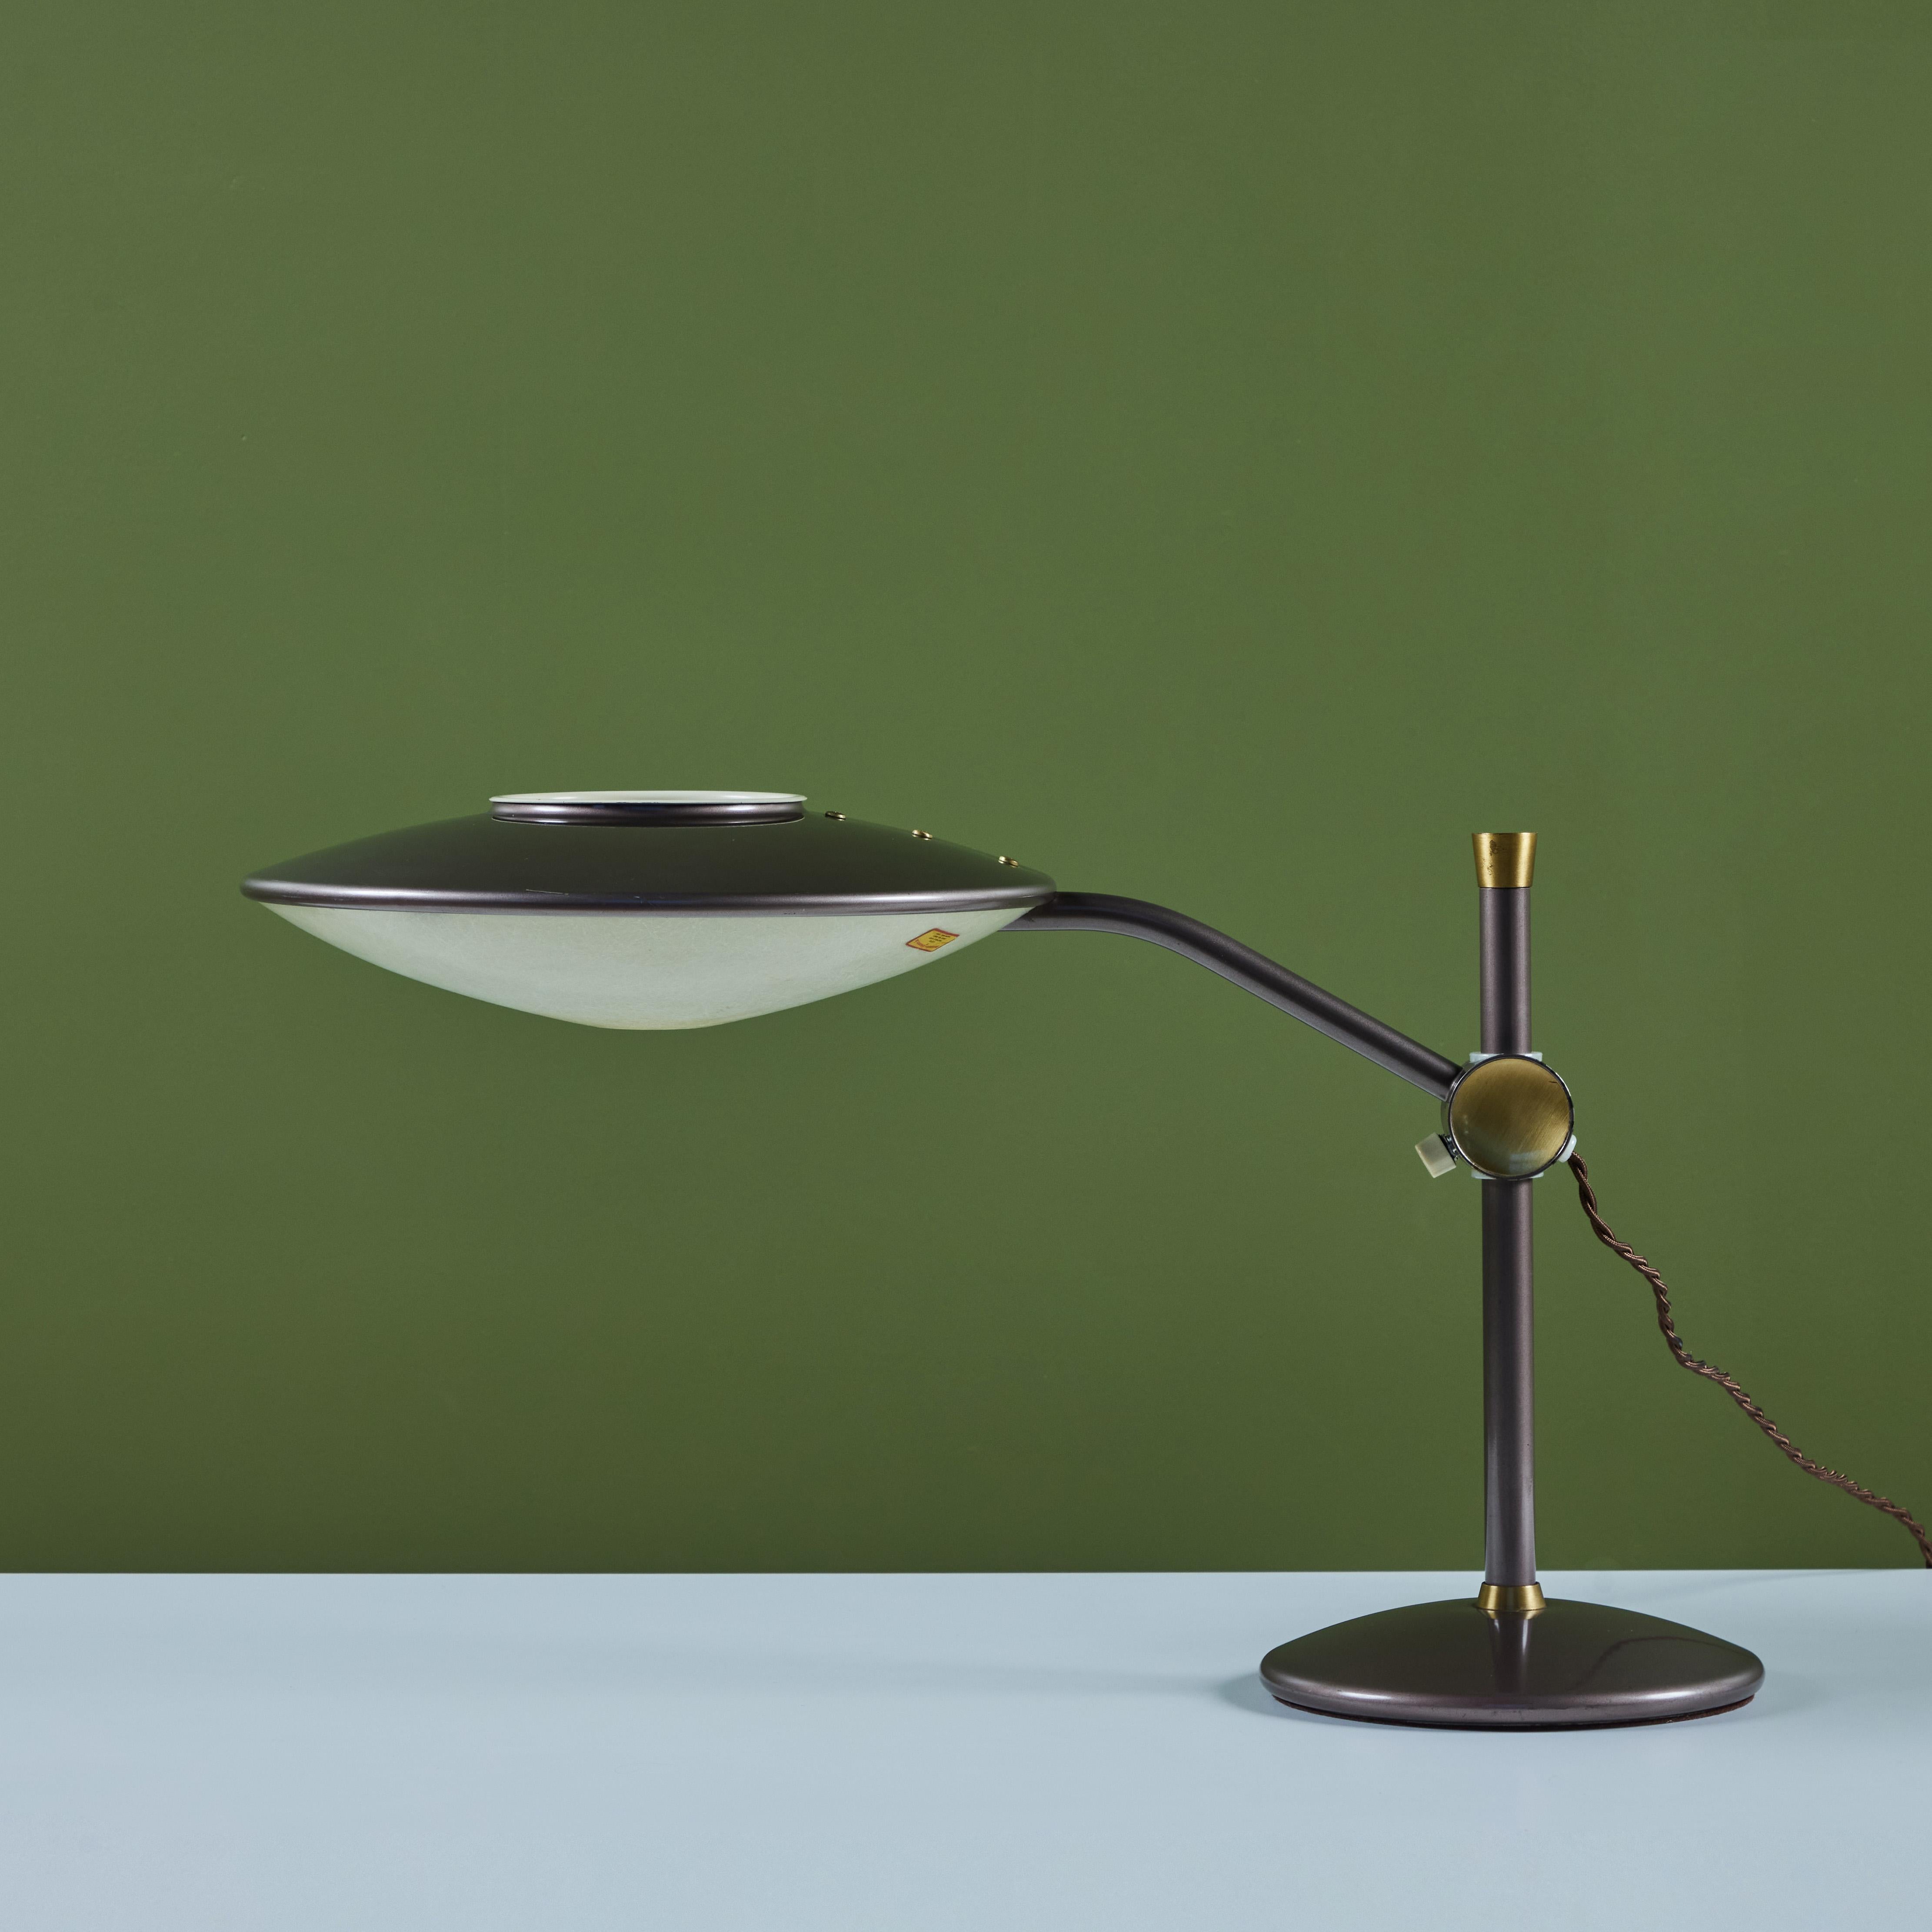 American Dazor Taupe Enamel Desk Lamp with Brass Accents